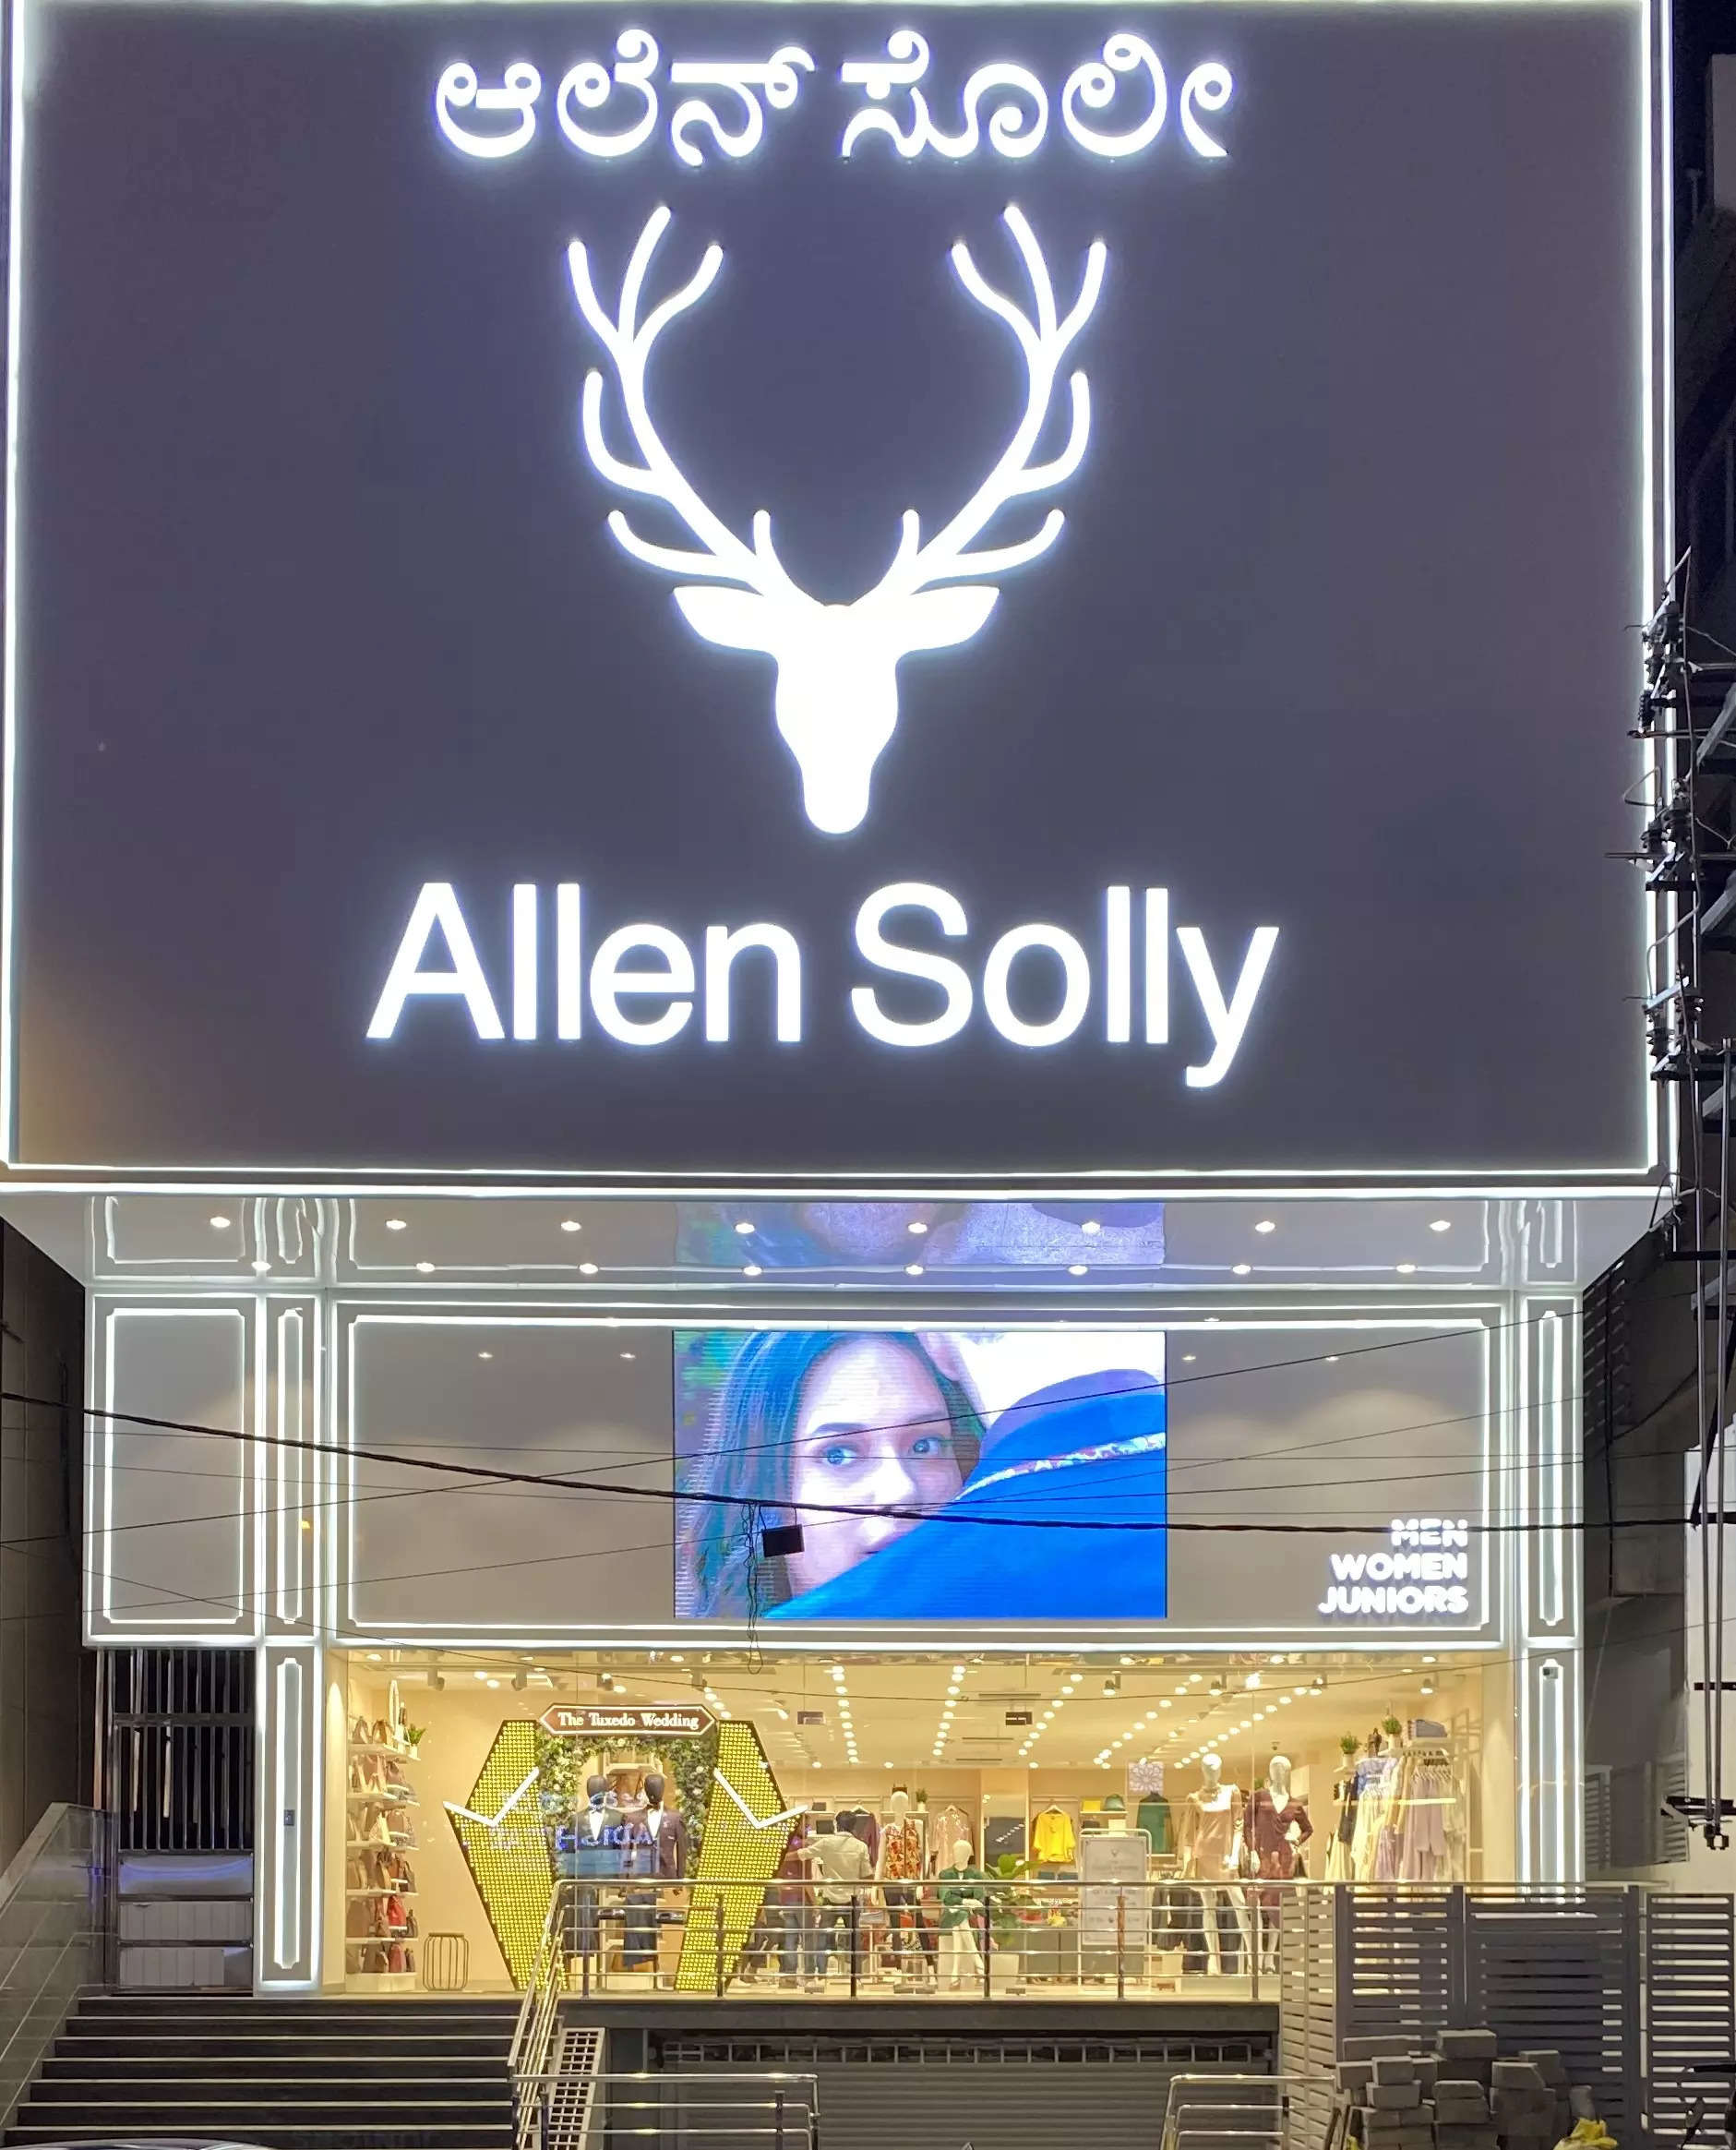 Allen Solly Woman launches 'Fun at Work' campaign, Marketing